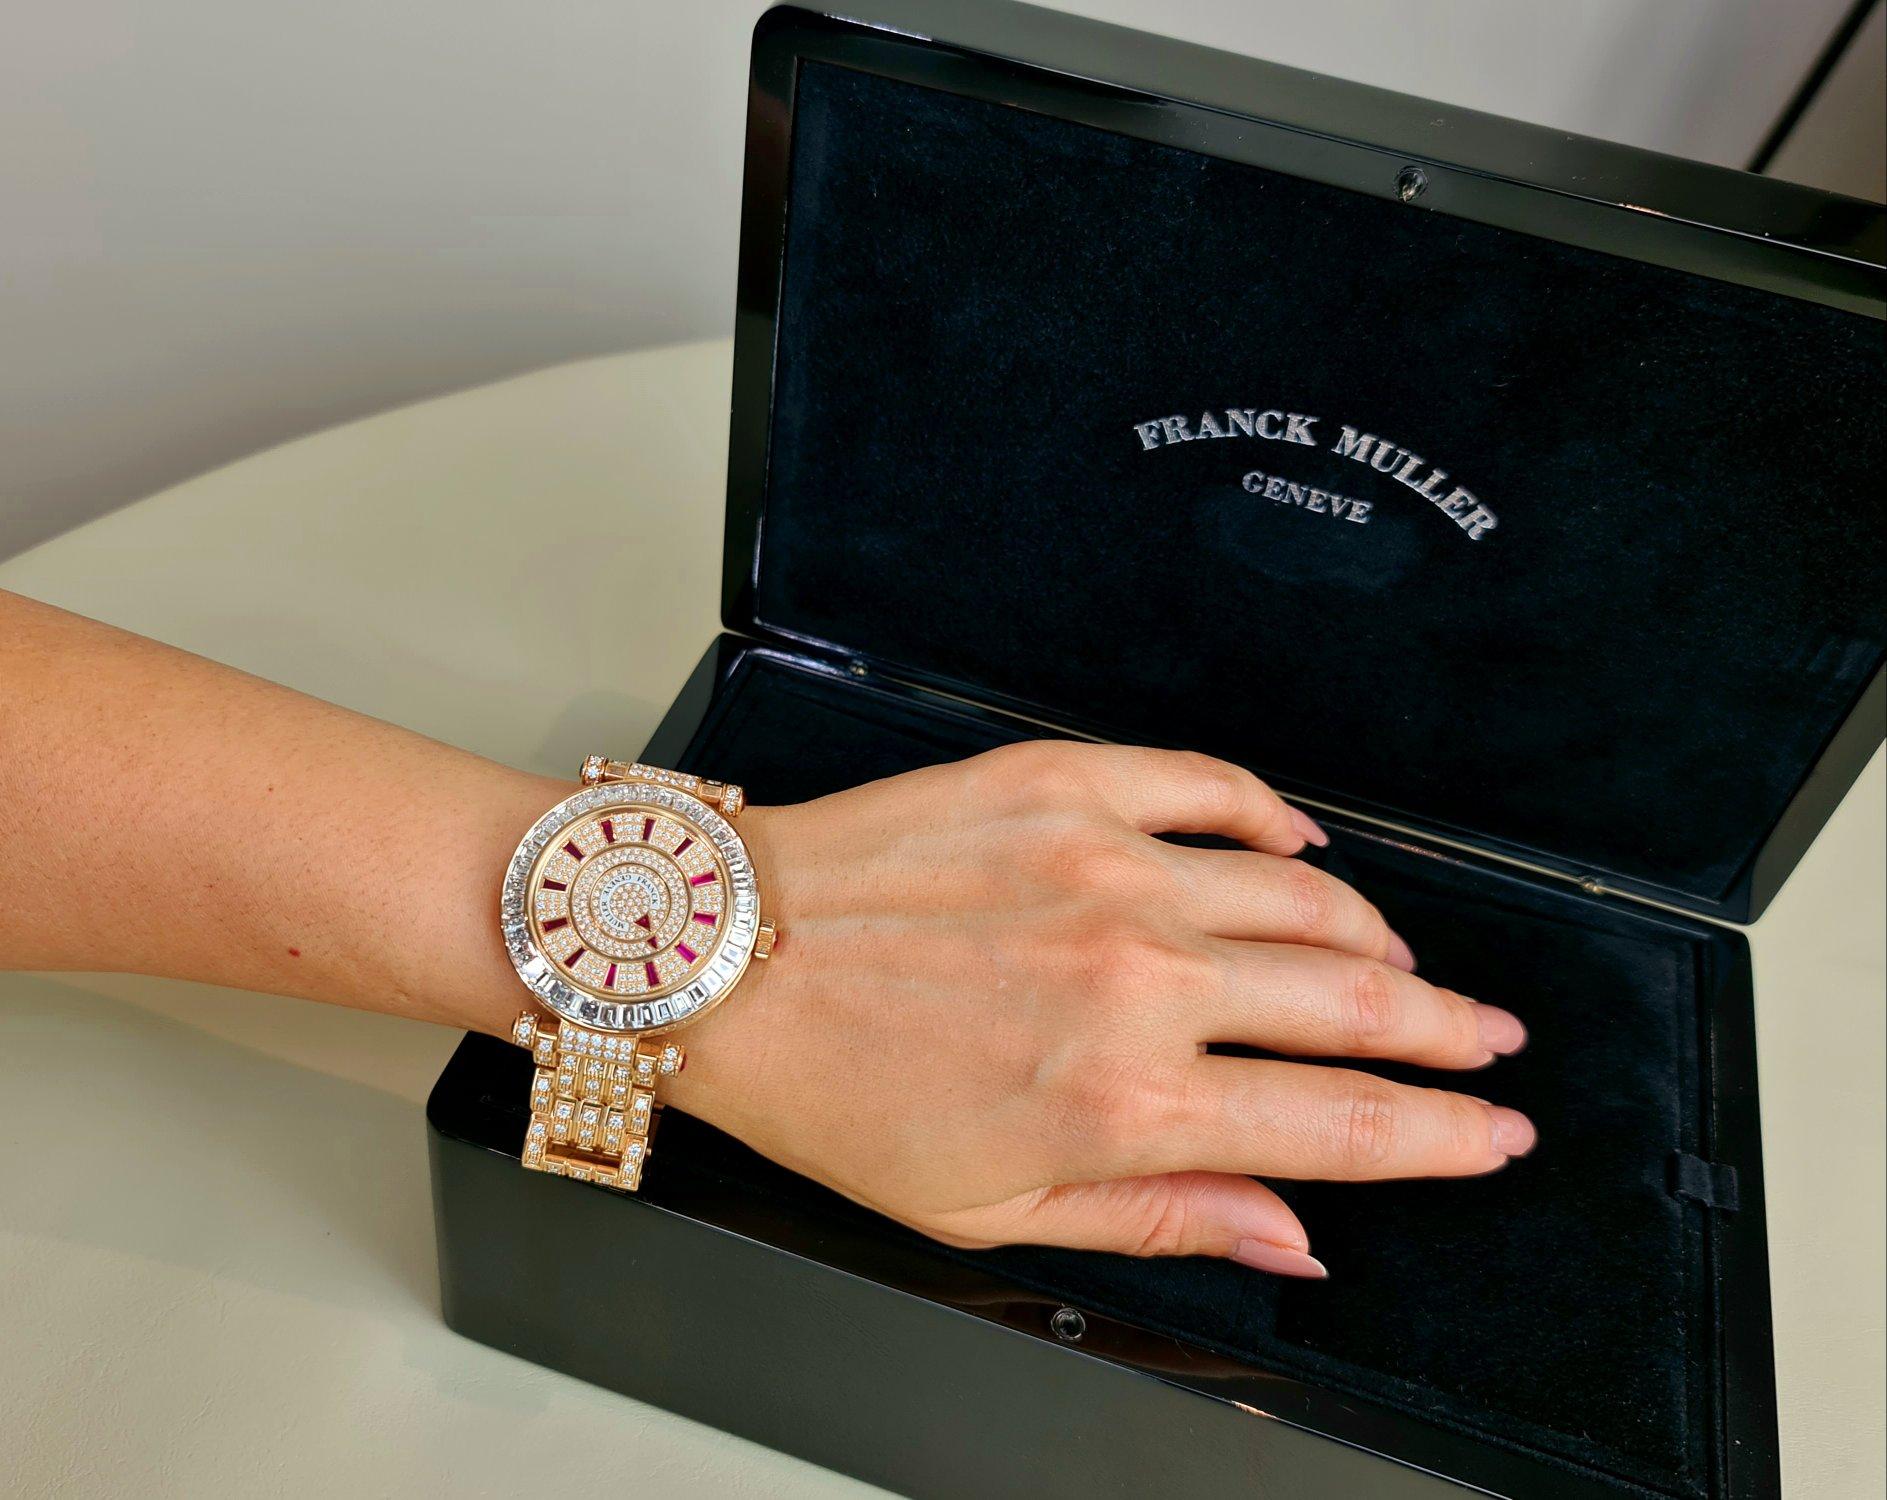 This show-stopping automatic wristwatch by Swiss luxury watch manufacturer, Franck Muller is an exquisite masterpiece that will have all eyes centred upon you. The diamond dial with baton ruby markers is bordered by a fixed bezel composed of a